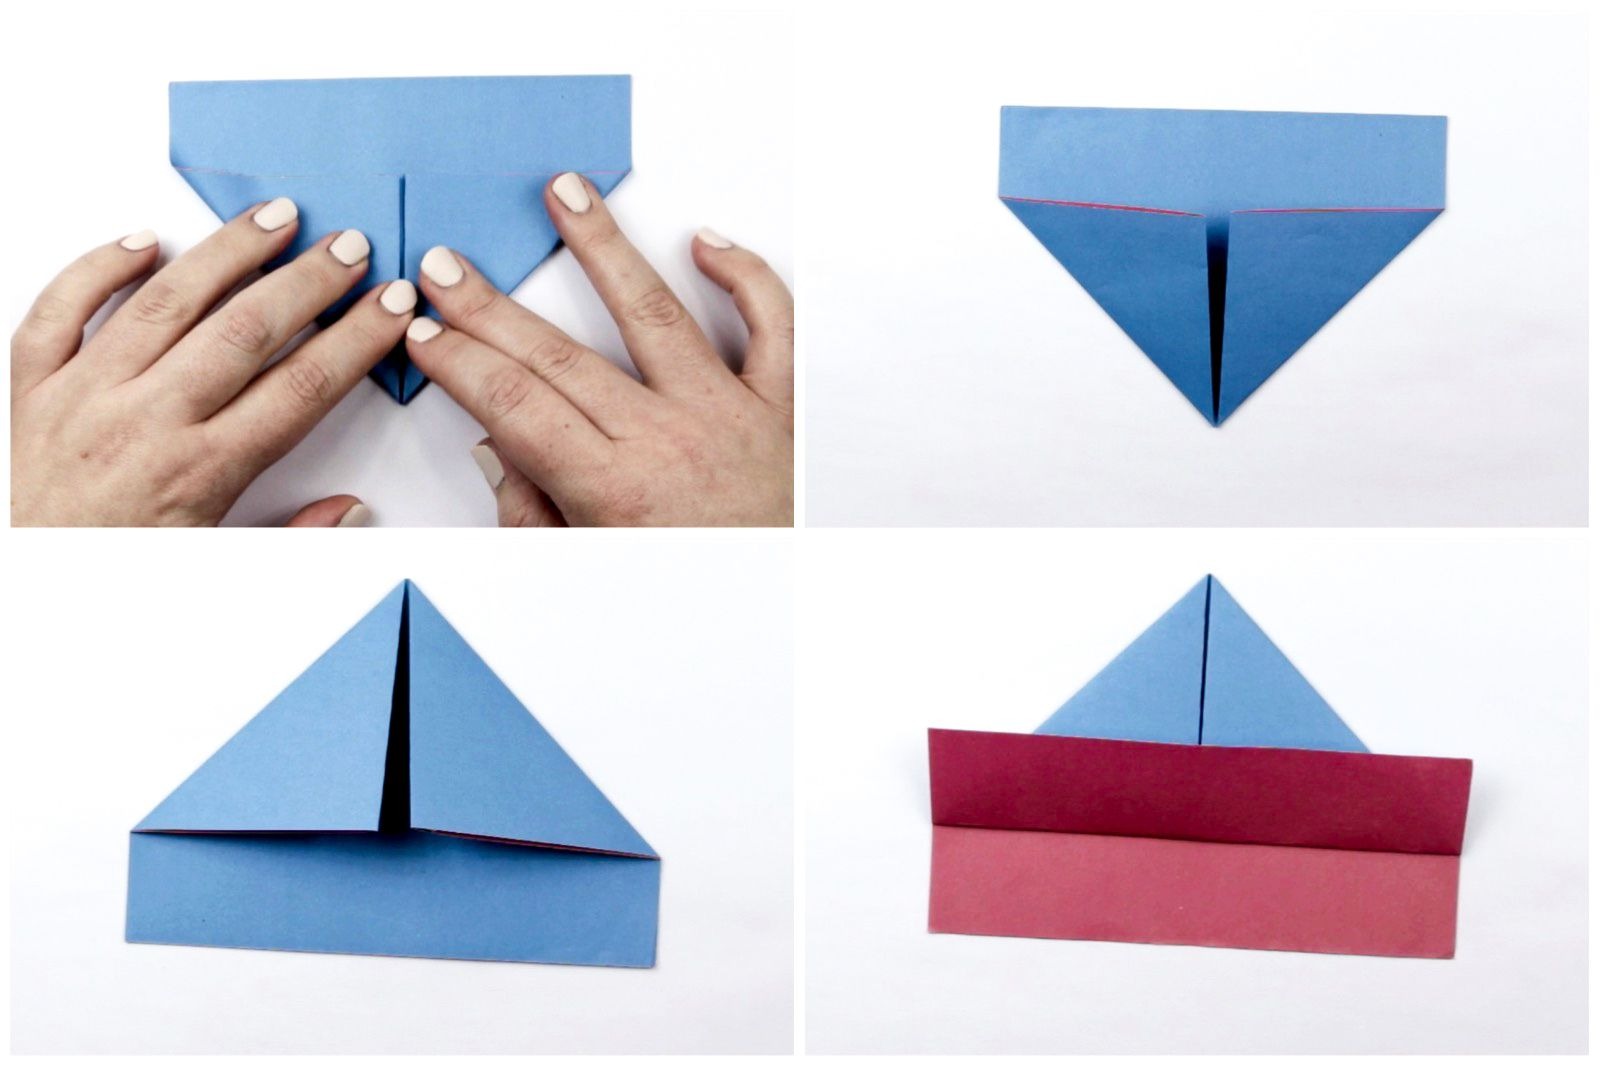 How To Make An Origami Boat Step By Step How To Make An Easy Origami Boat